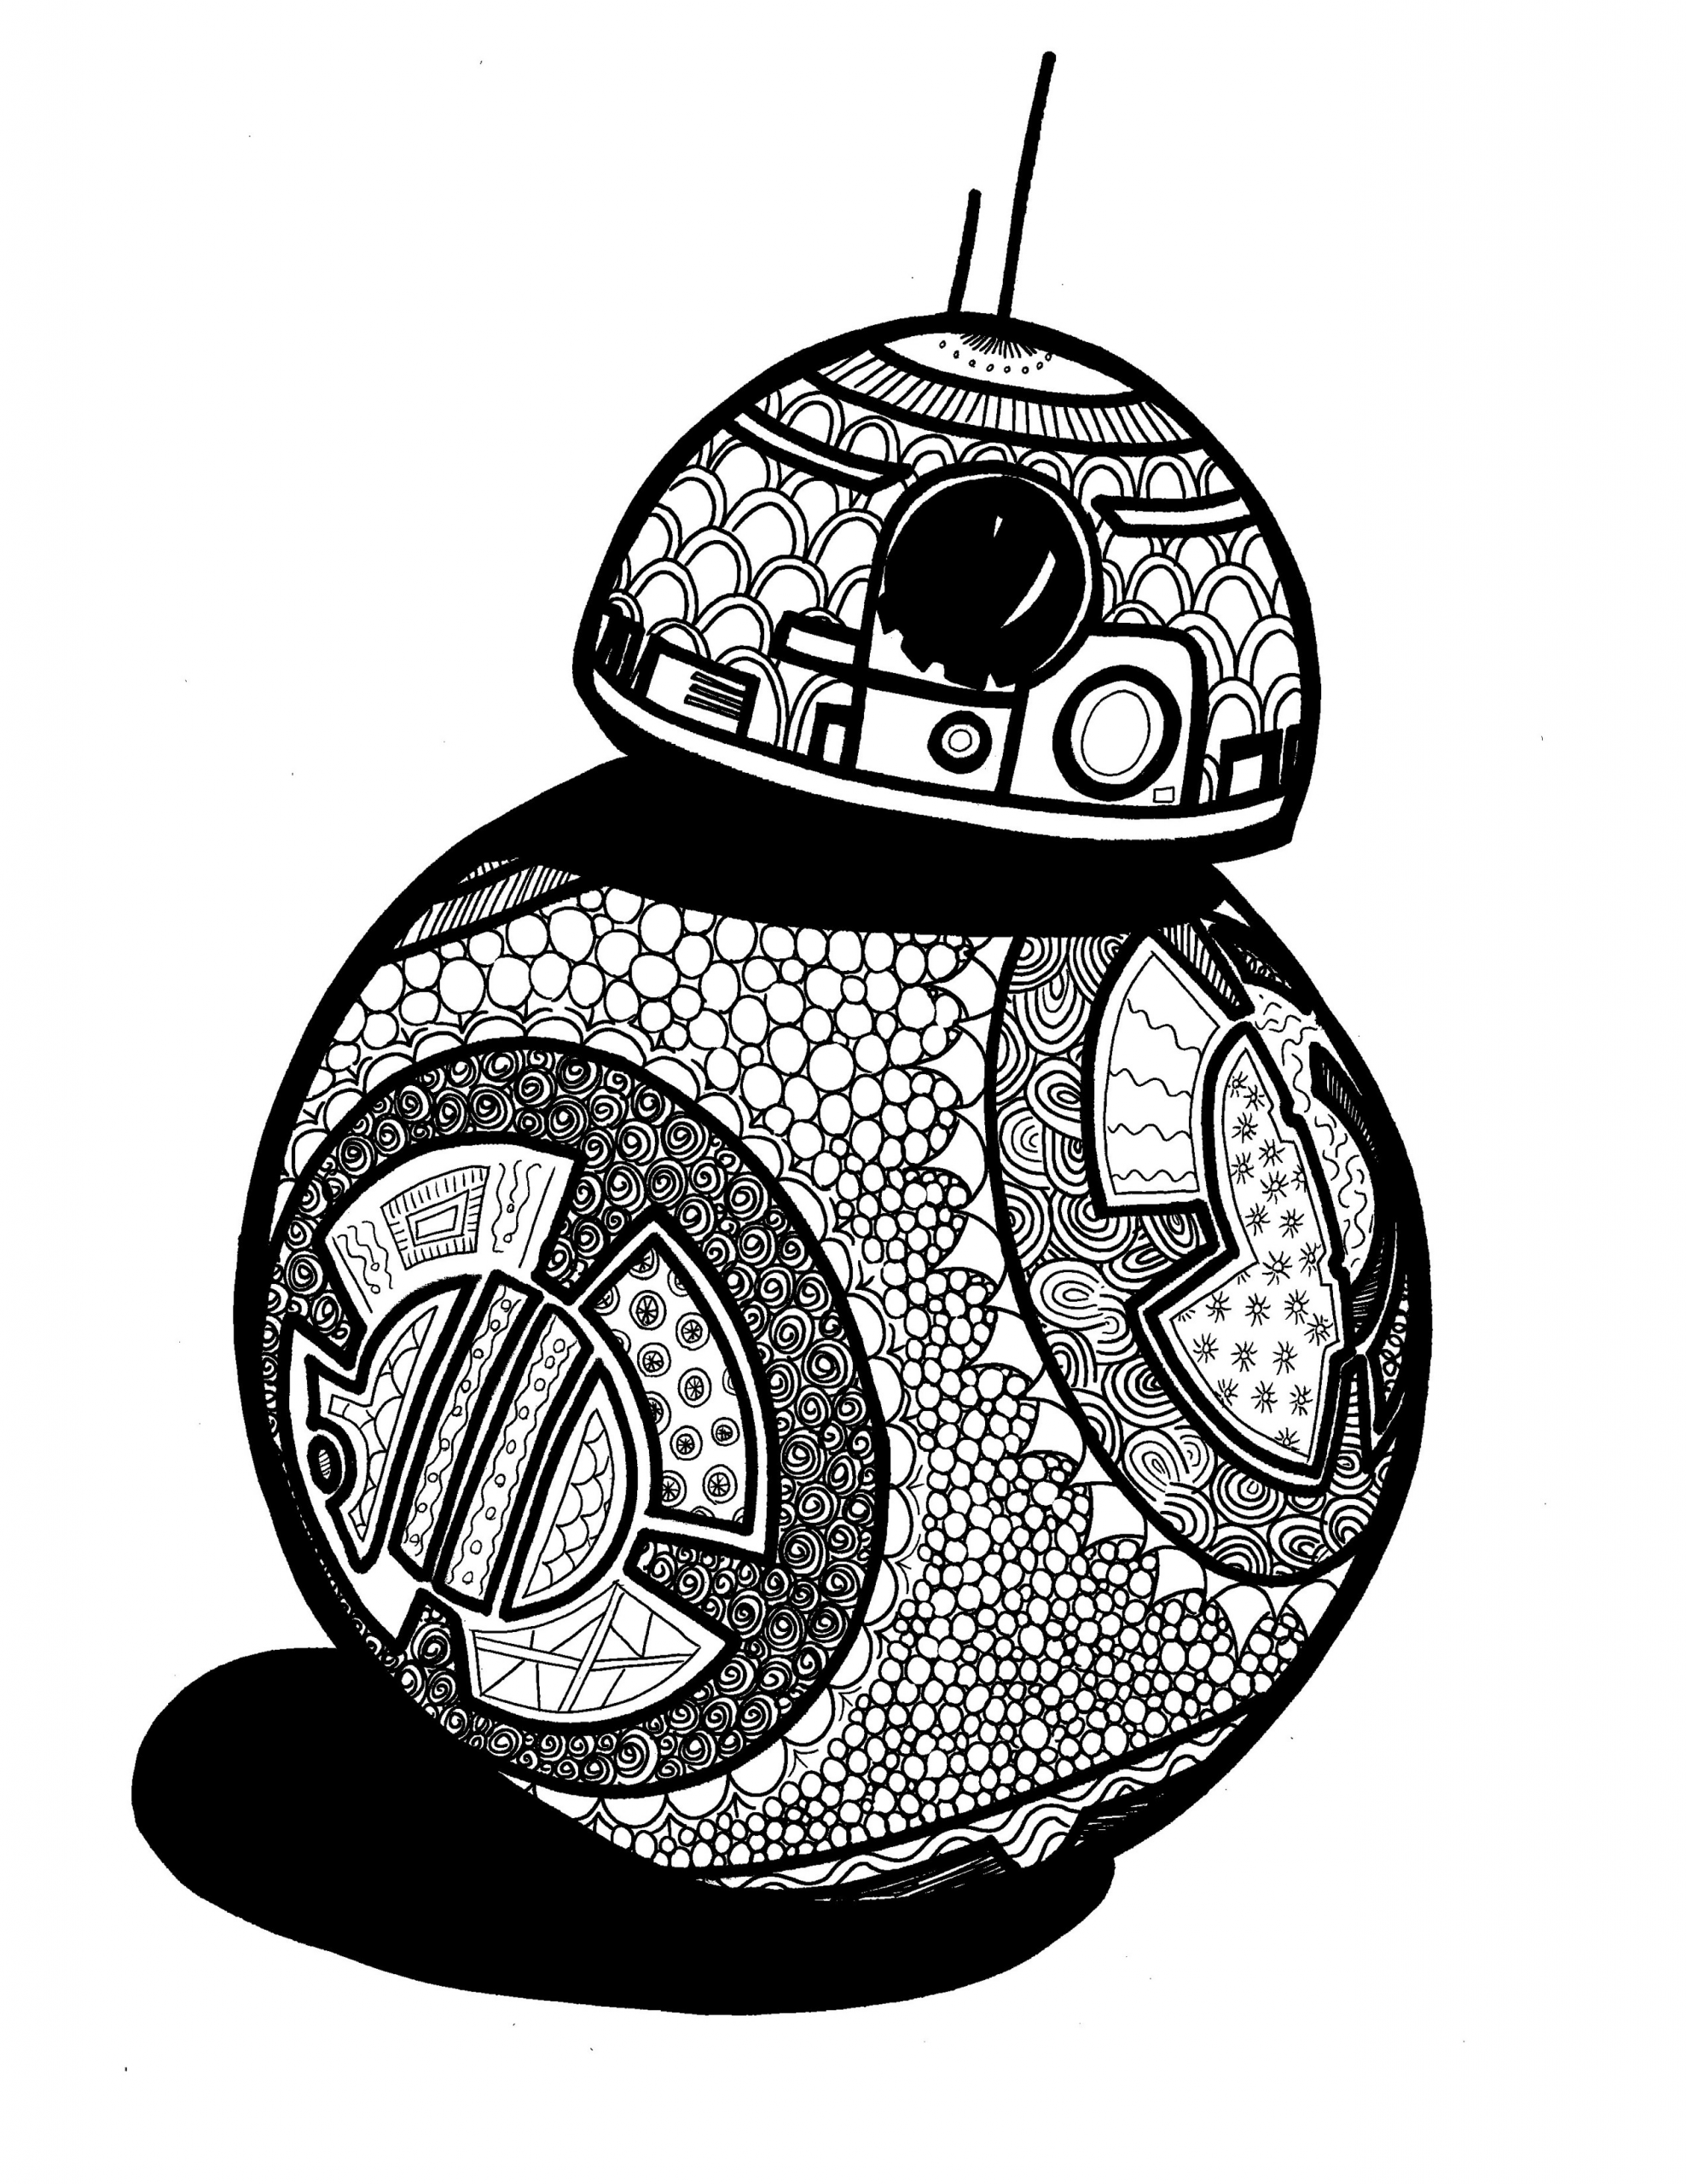 Adult Star Wars Coloring Book
 Pin by Sabrina Doner on coloring pages Pinterest